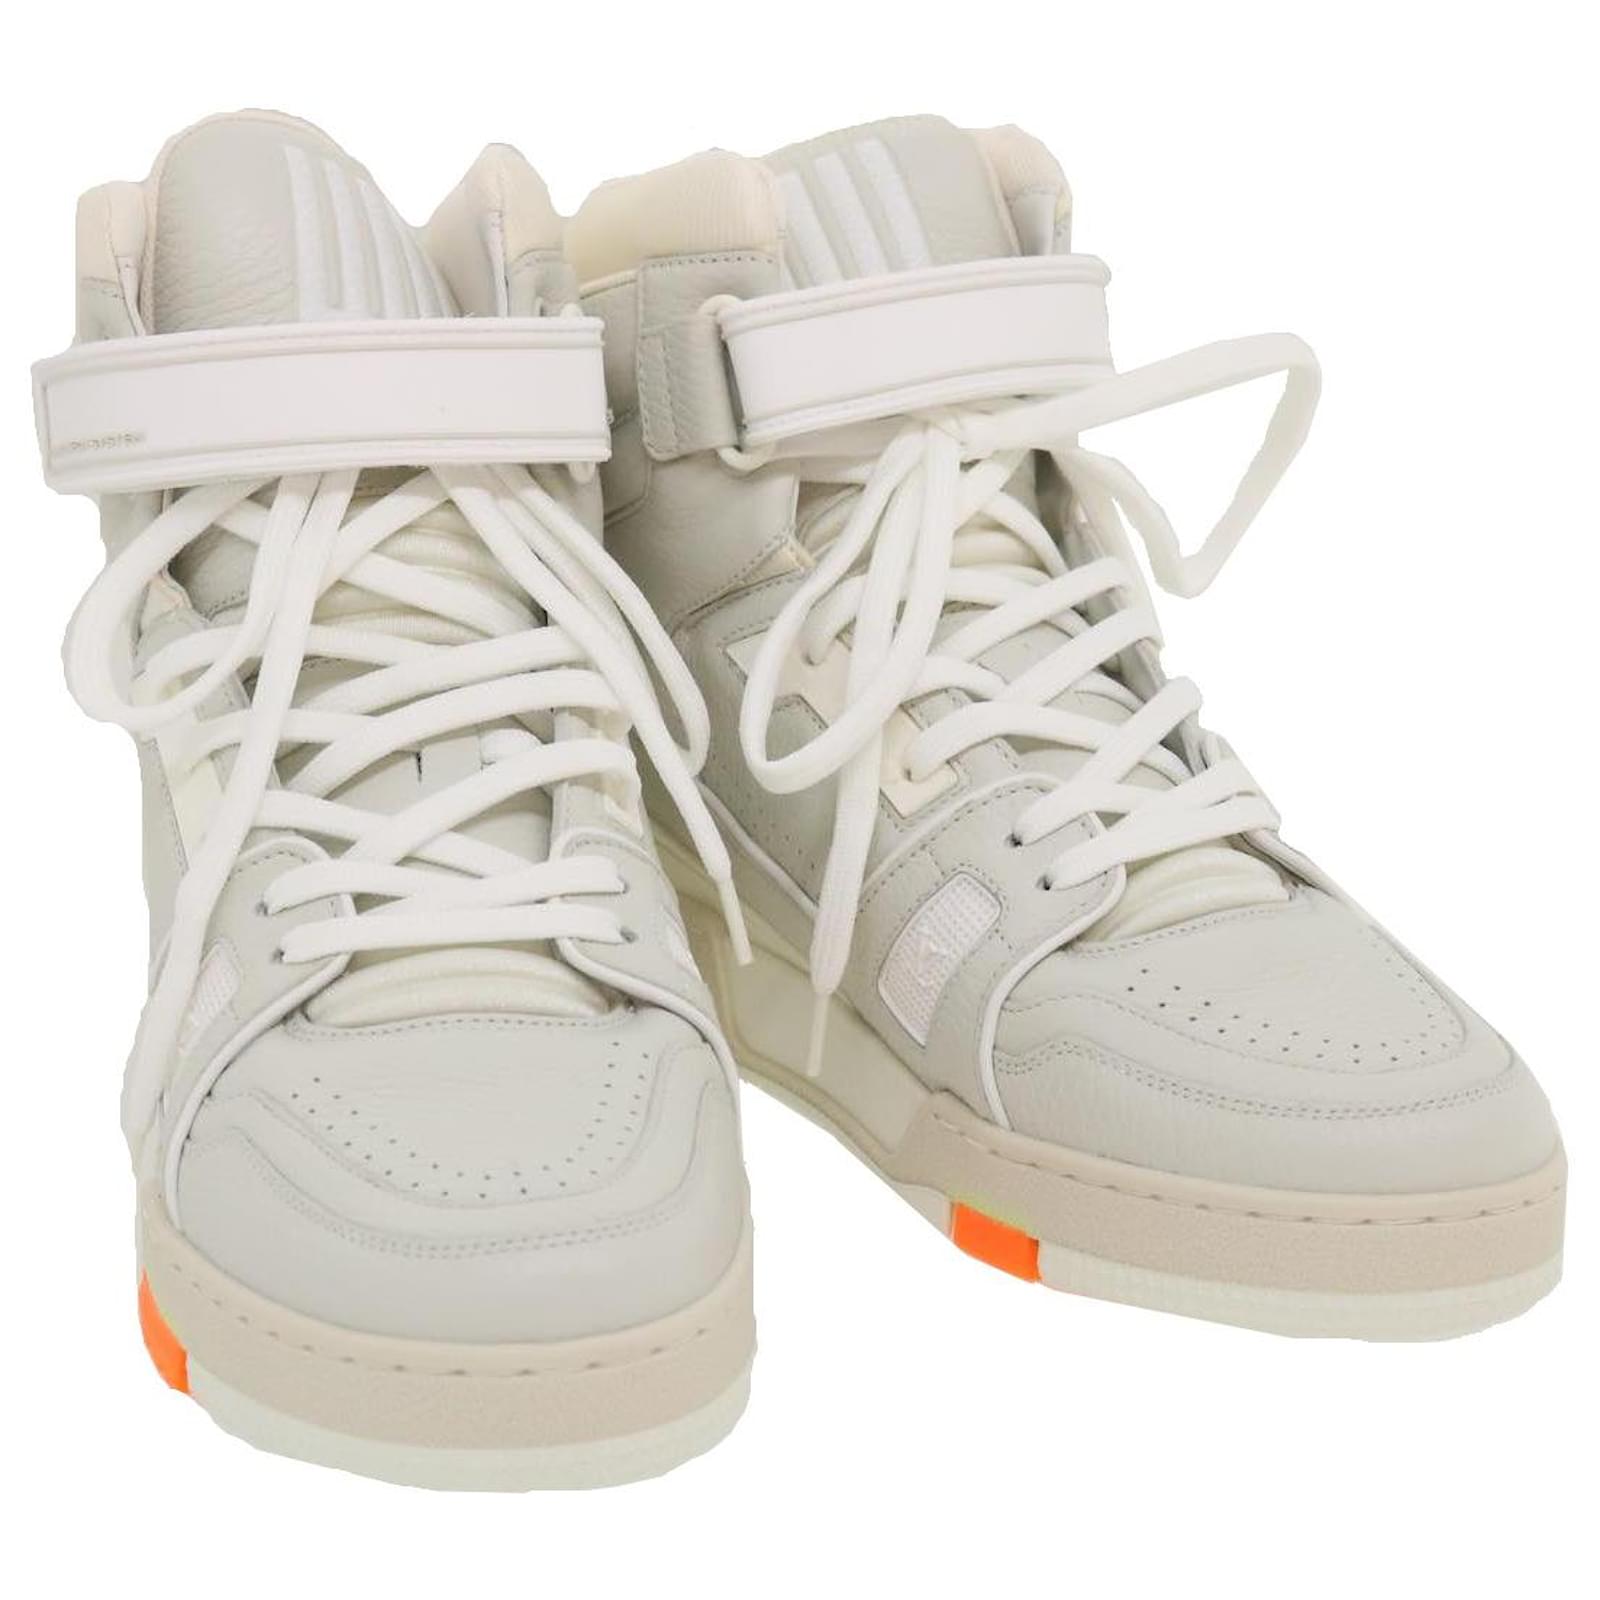 LOUIS VUITTON Trainer sneakers Leather High cut White 1a5a0D LV